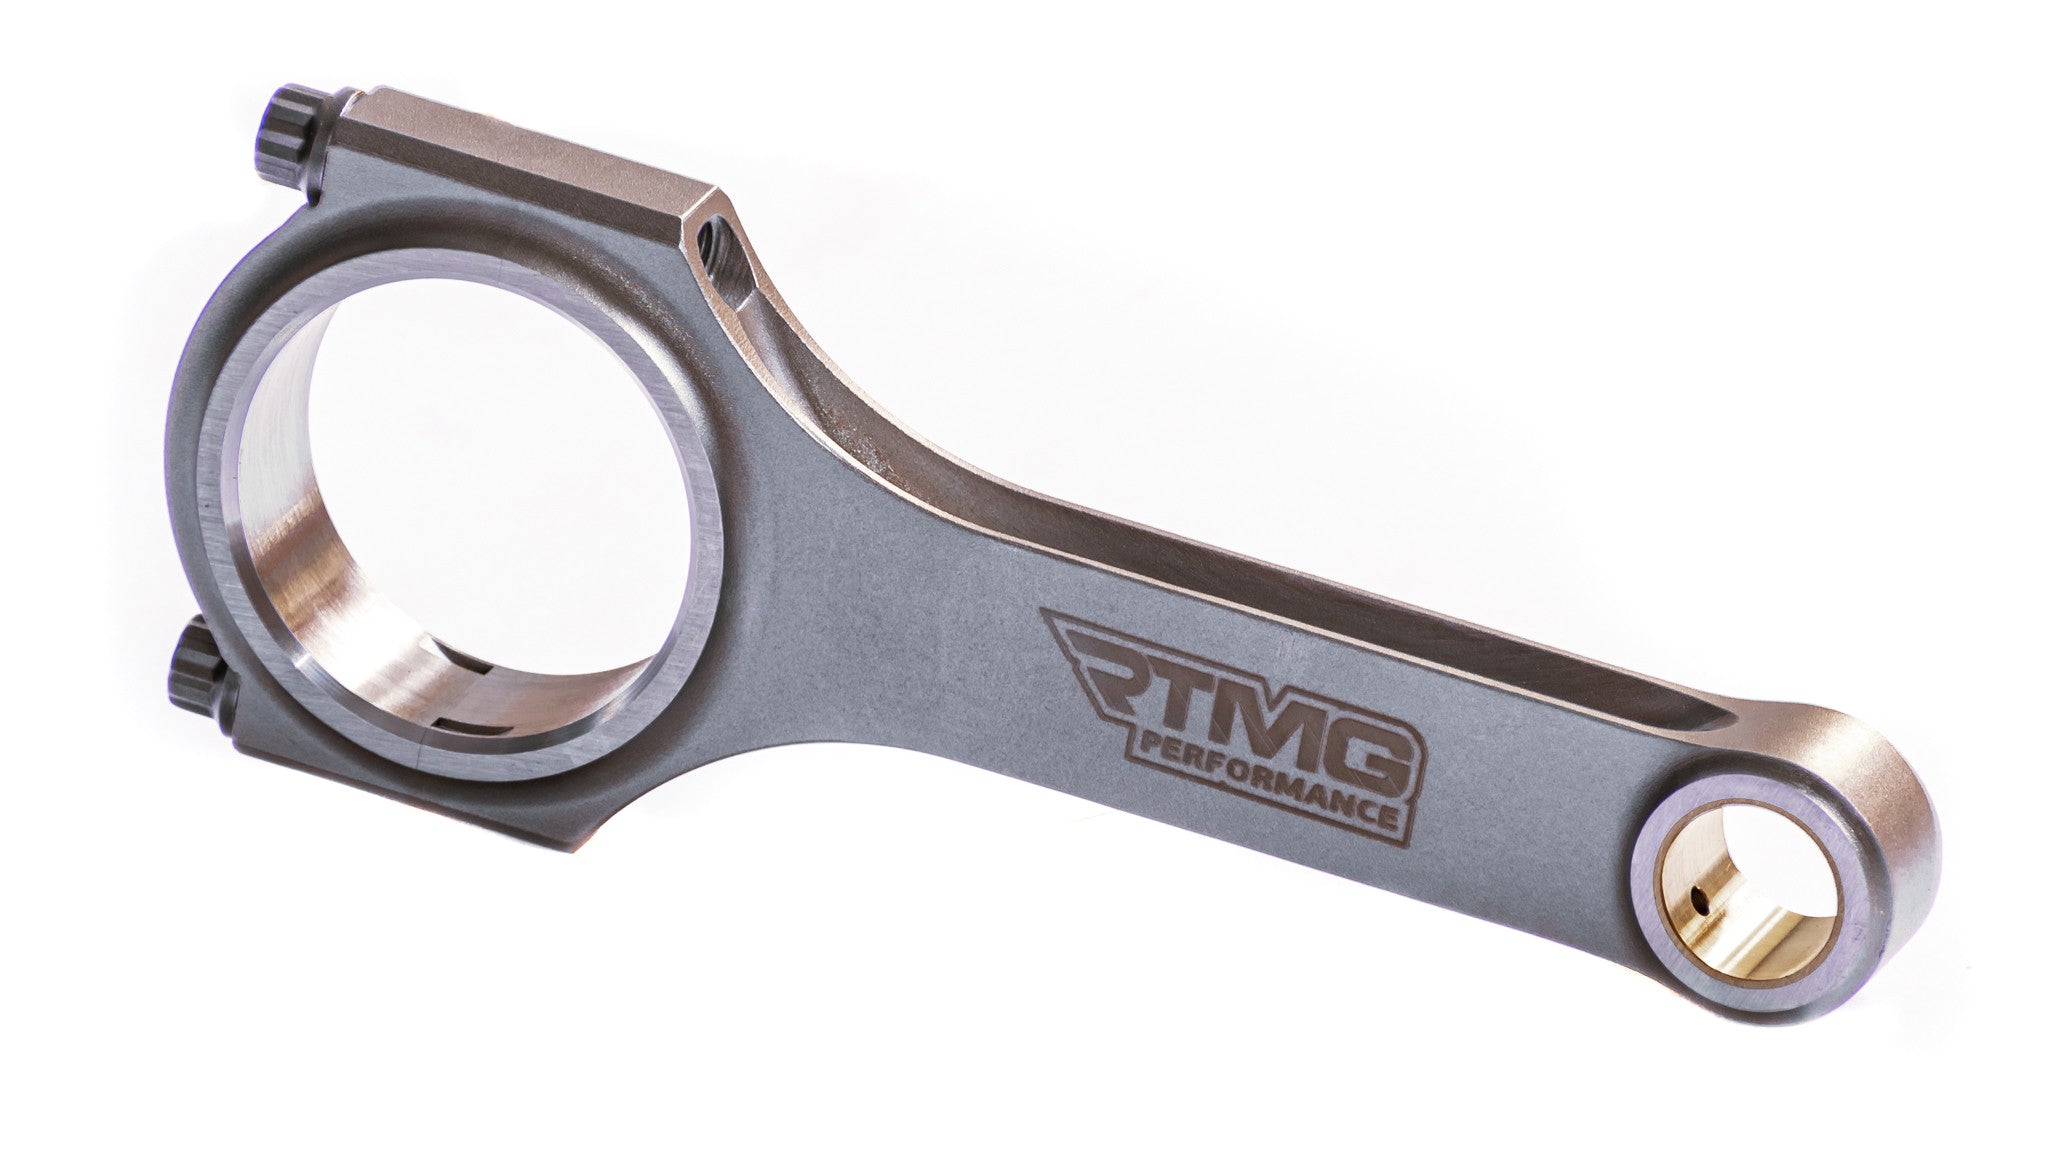 Connecting Rods Set for 1.4 TSI EA211 - Up to 600HP - RTMG Performance